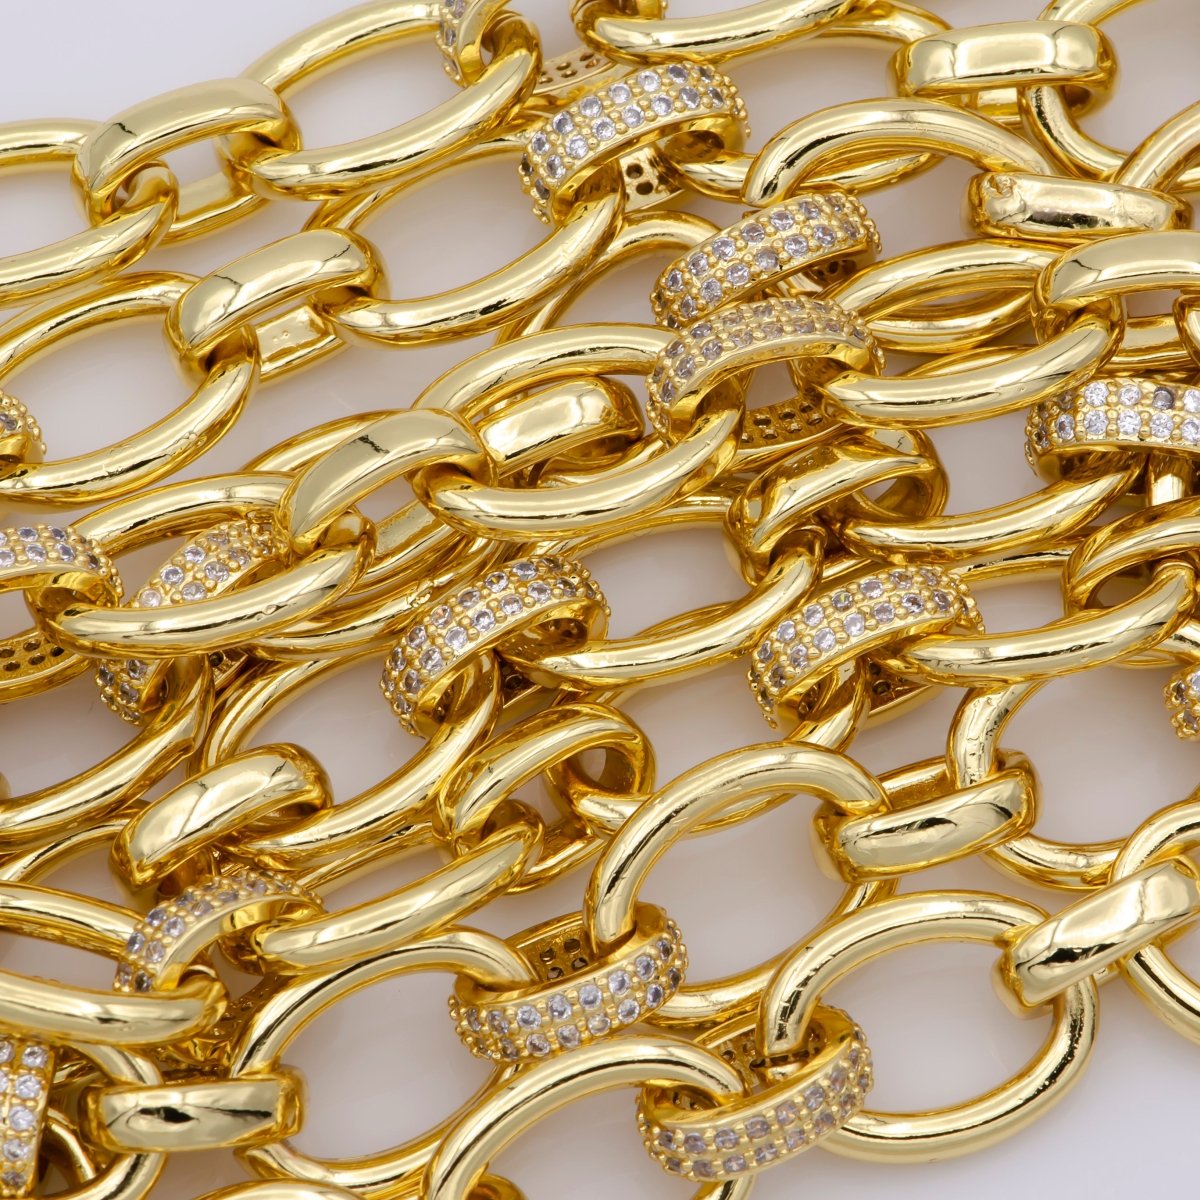 24K Gold Filled Micro Pave ROLO cable Chain with Cubic Zirconia by yard, CZ Cable Chain Necklace Specialty Link Chain by yard Rolo Cable Chain for Fashion Jewelry | ROLL-244(O-060), ROLL-245 (O-061) Clearance Pricing - DLUXCA